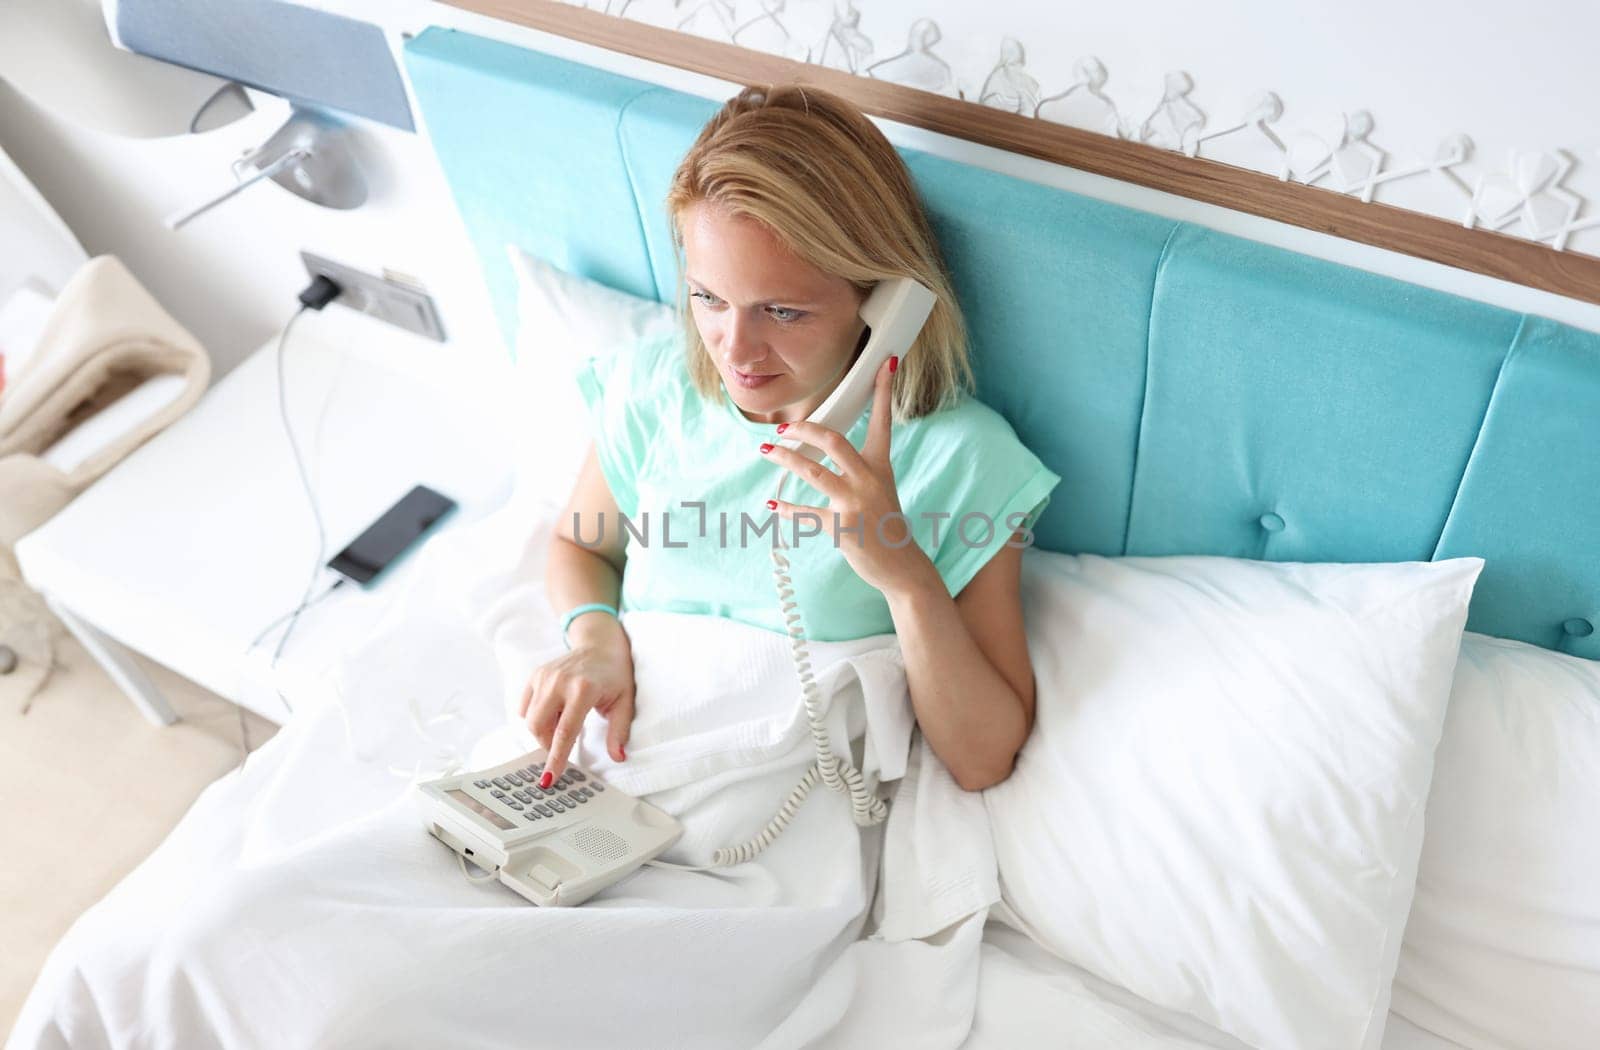 Woman lies on bed and dials number on phone. High-quality service in hotel rooms concept